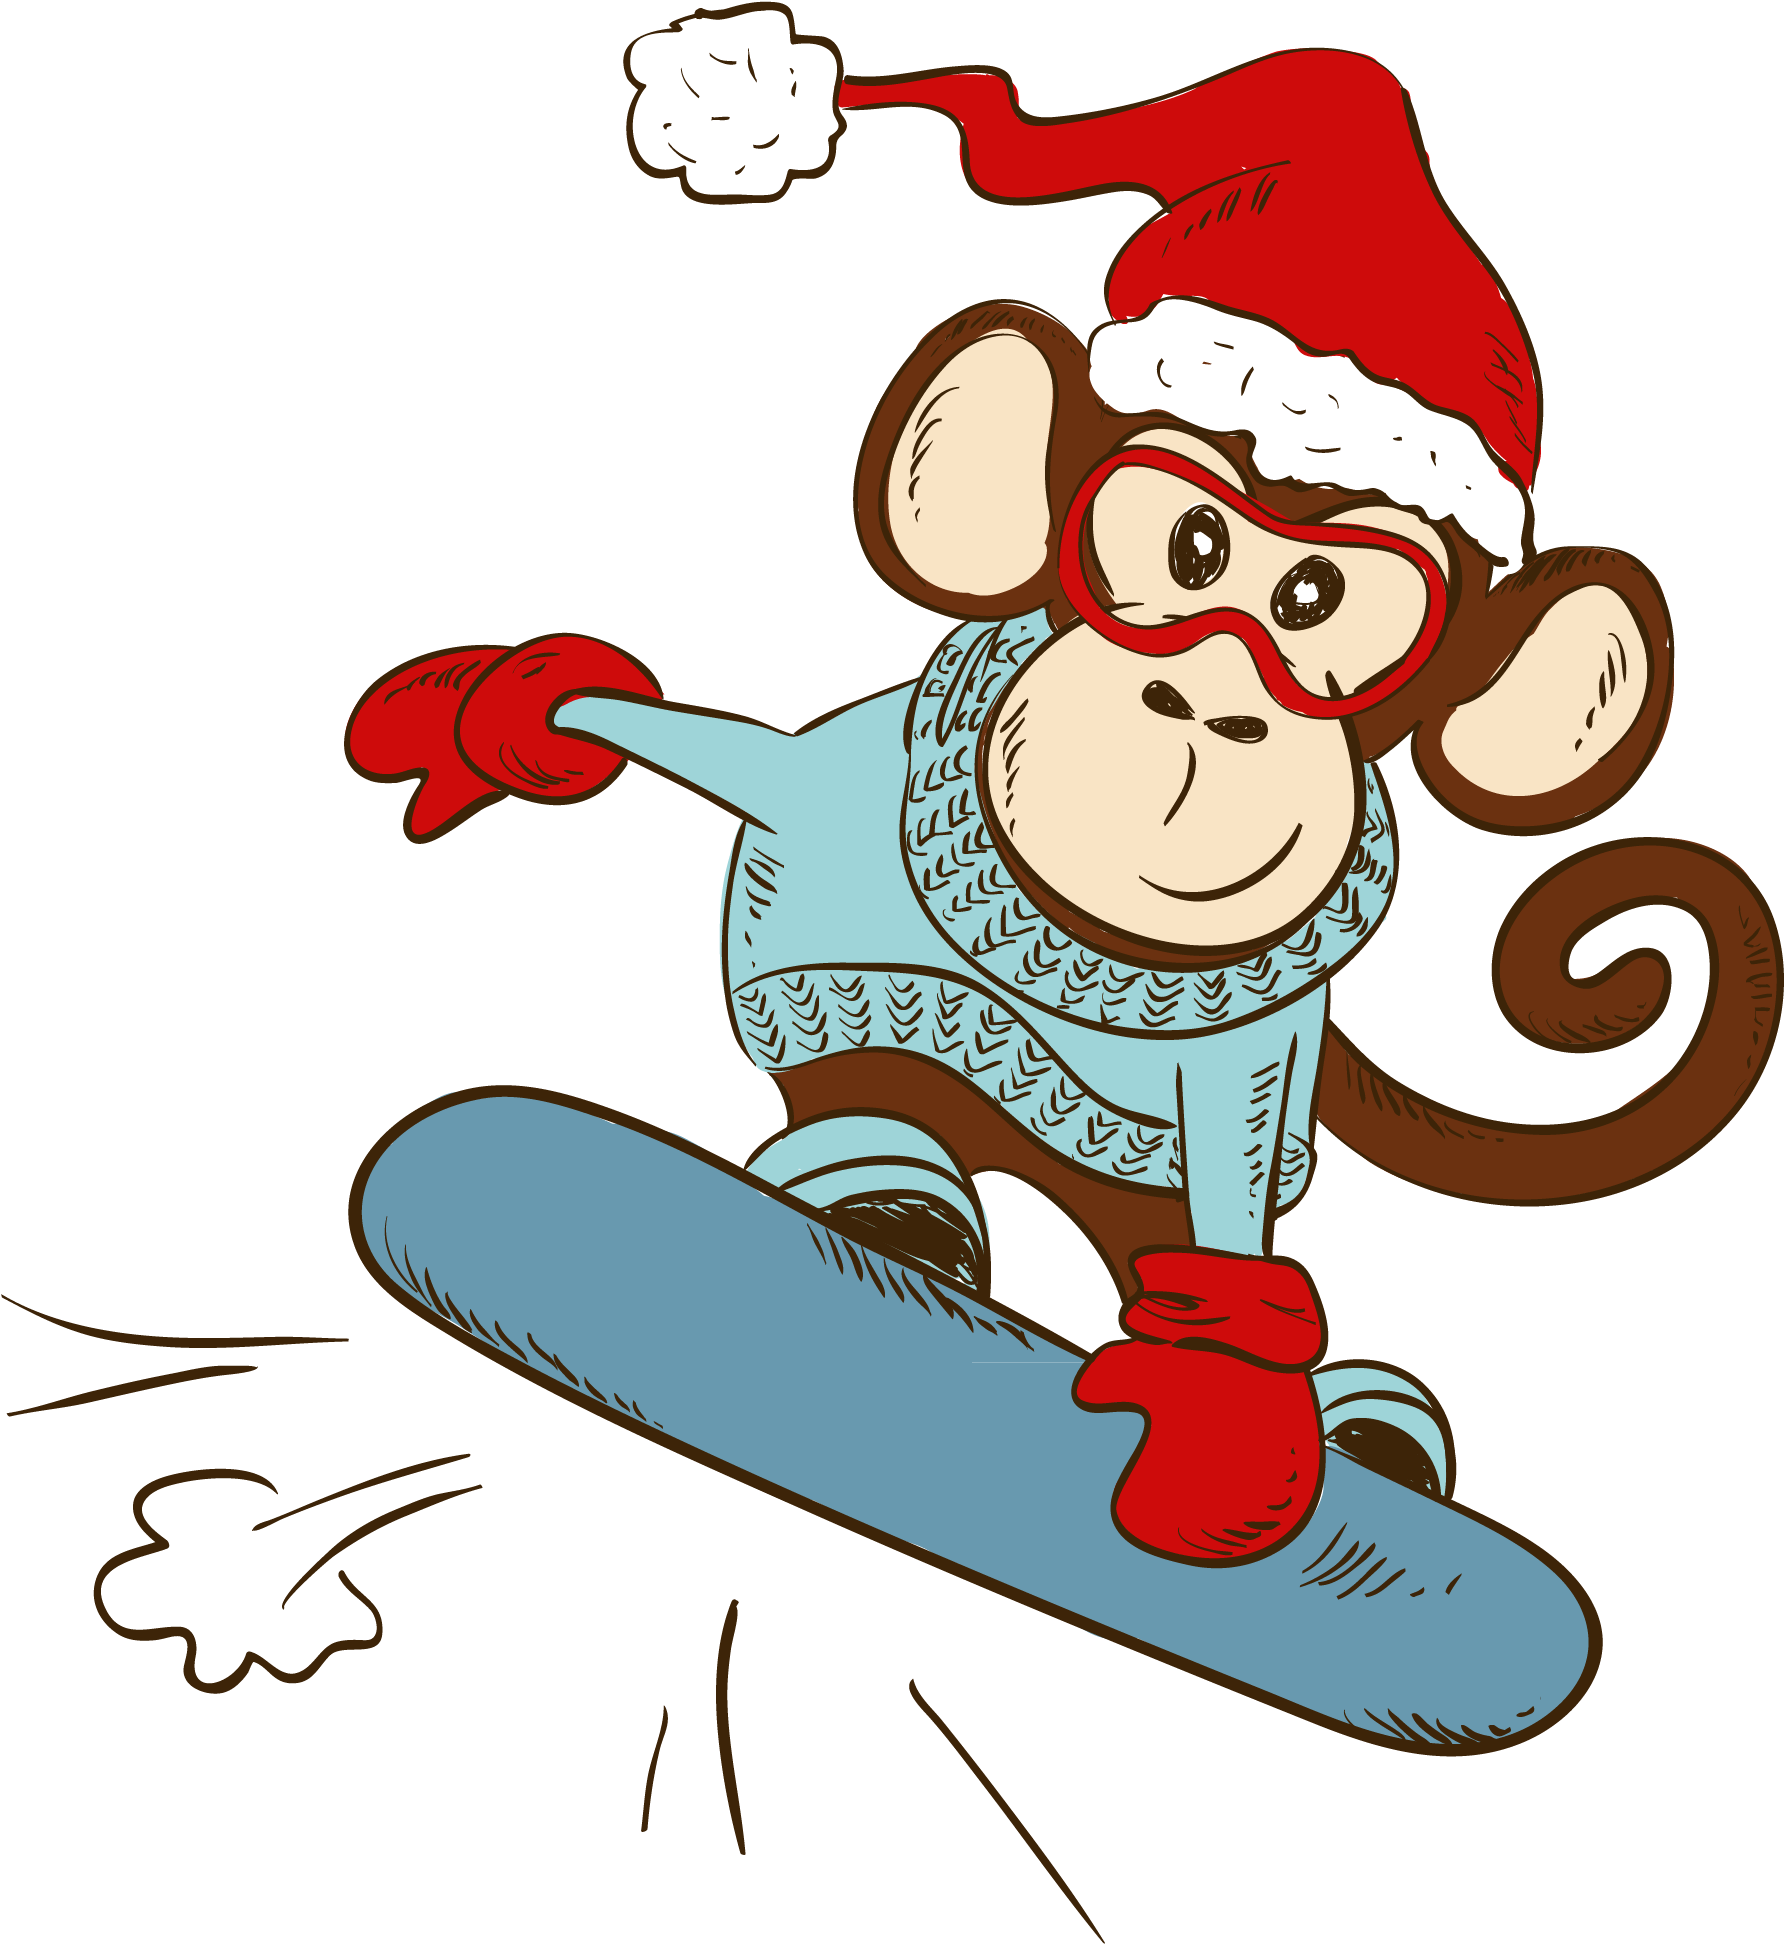 A Cartoon Of A Monkey Wearing A Santa Hat And Glasses On A Snowboard